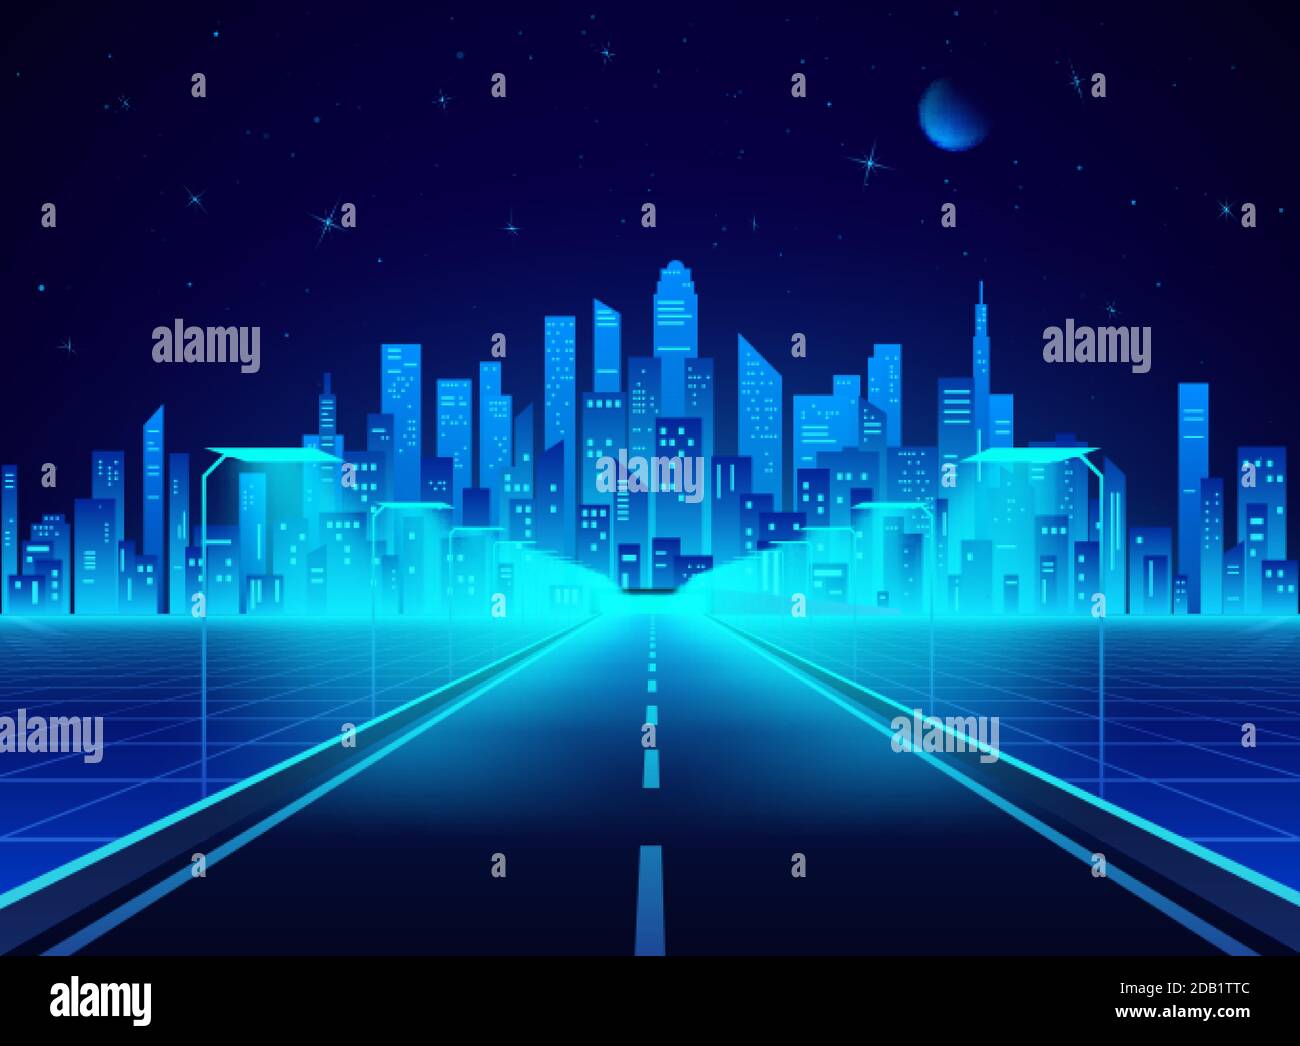 Neon retro city landscape in blue colors. Highway to cyberpunk futuristic town. Sci-fi background abstract digital architecture. Vector illustration Stock Vector